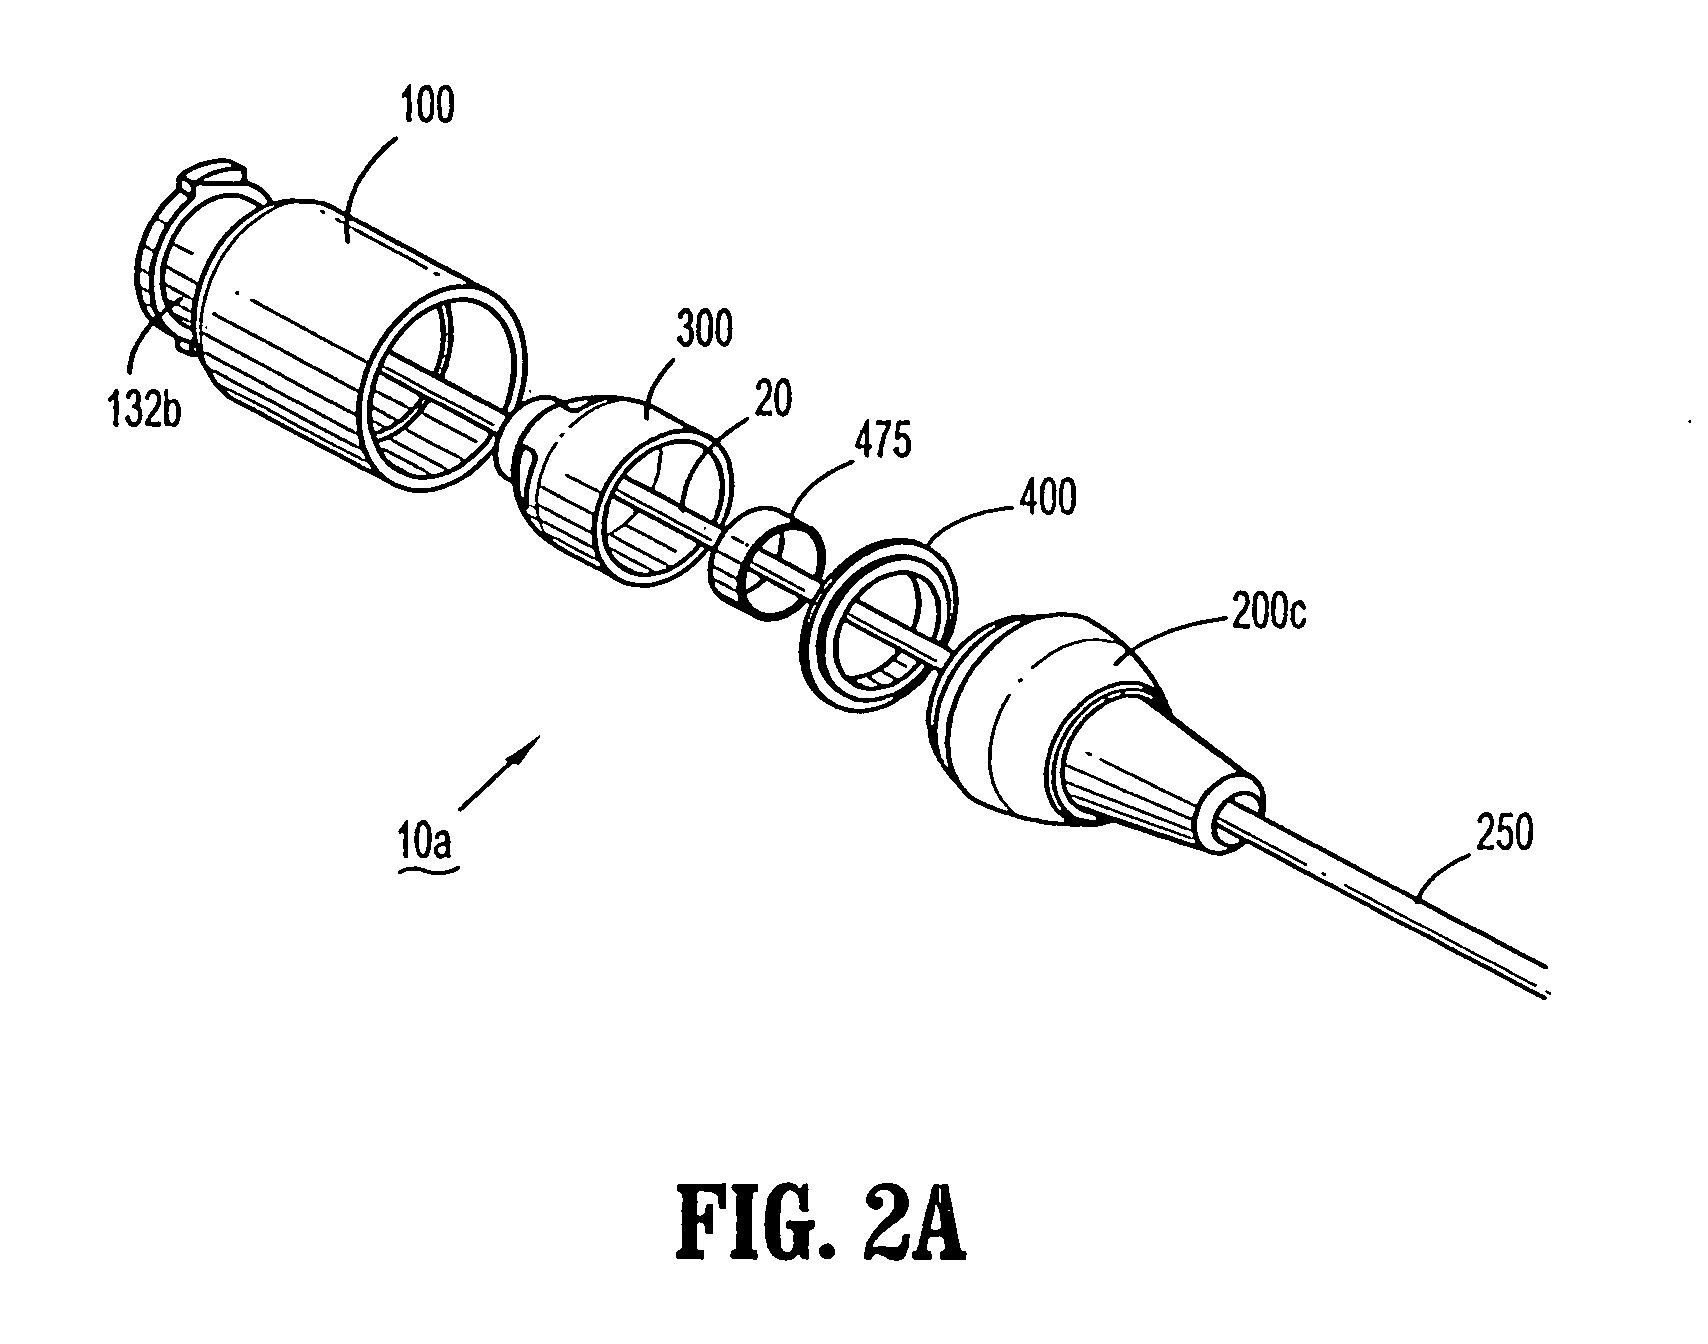 IV catheter with in-line valve and methods related thereto